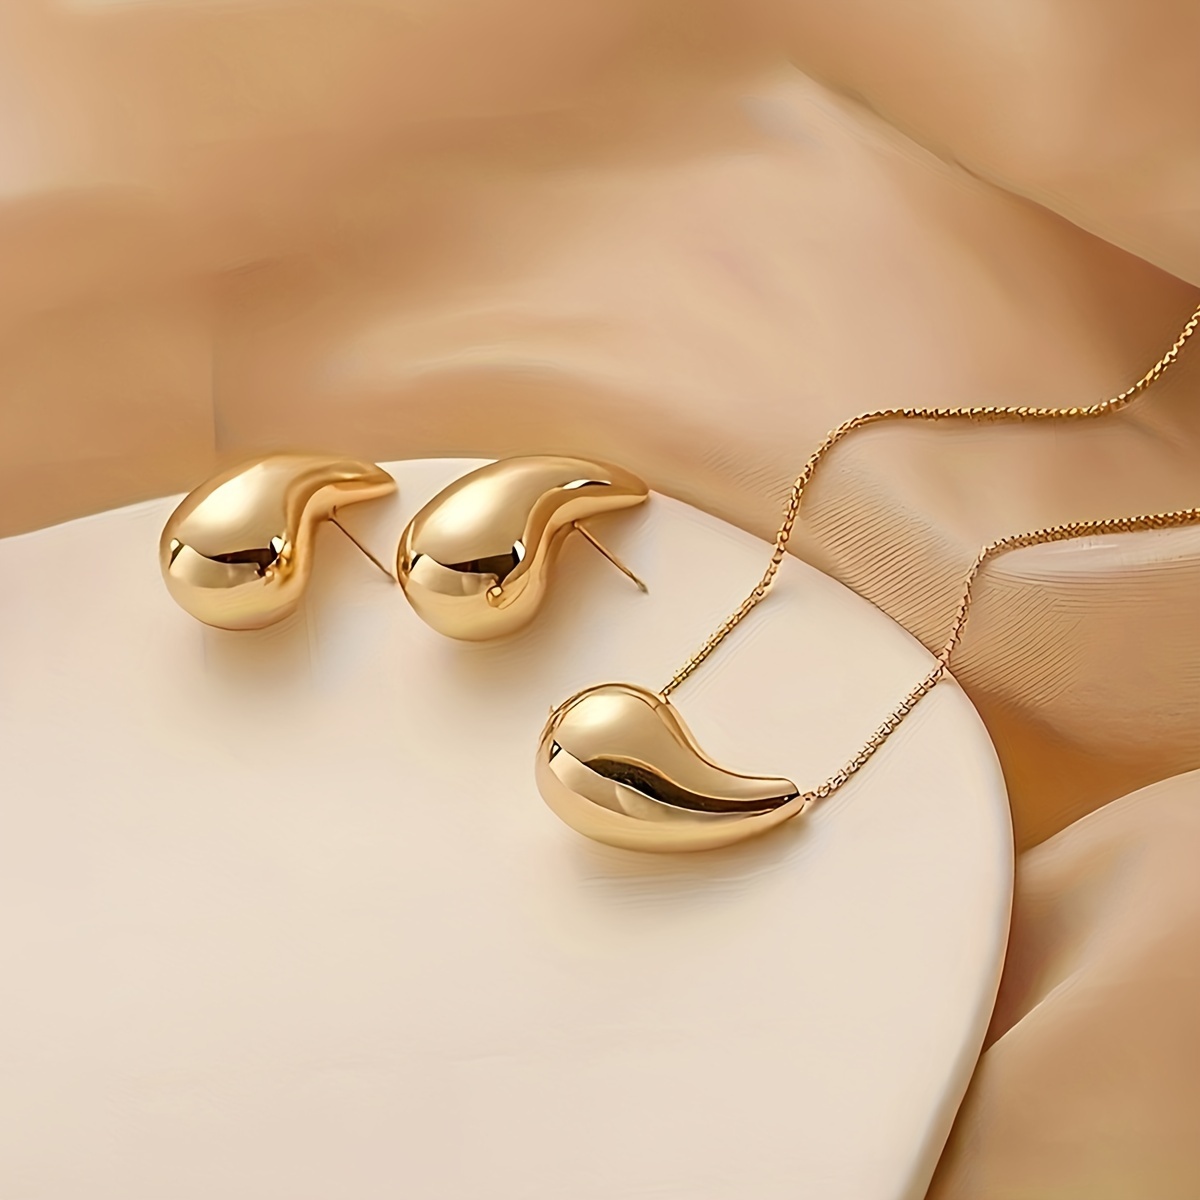 

Elegant 3-piece Golden Metal Teardrop Earrings And Necklace Jewelry Set, Simple Minimalist Style, Women's Vacation Date Gift, Dainty Fashion Accessories